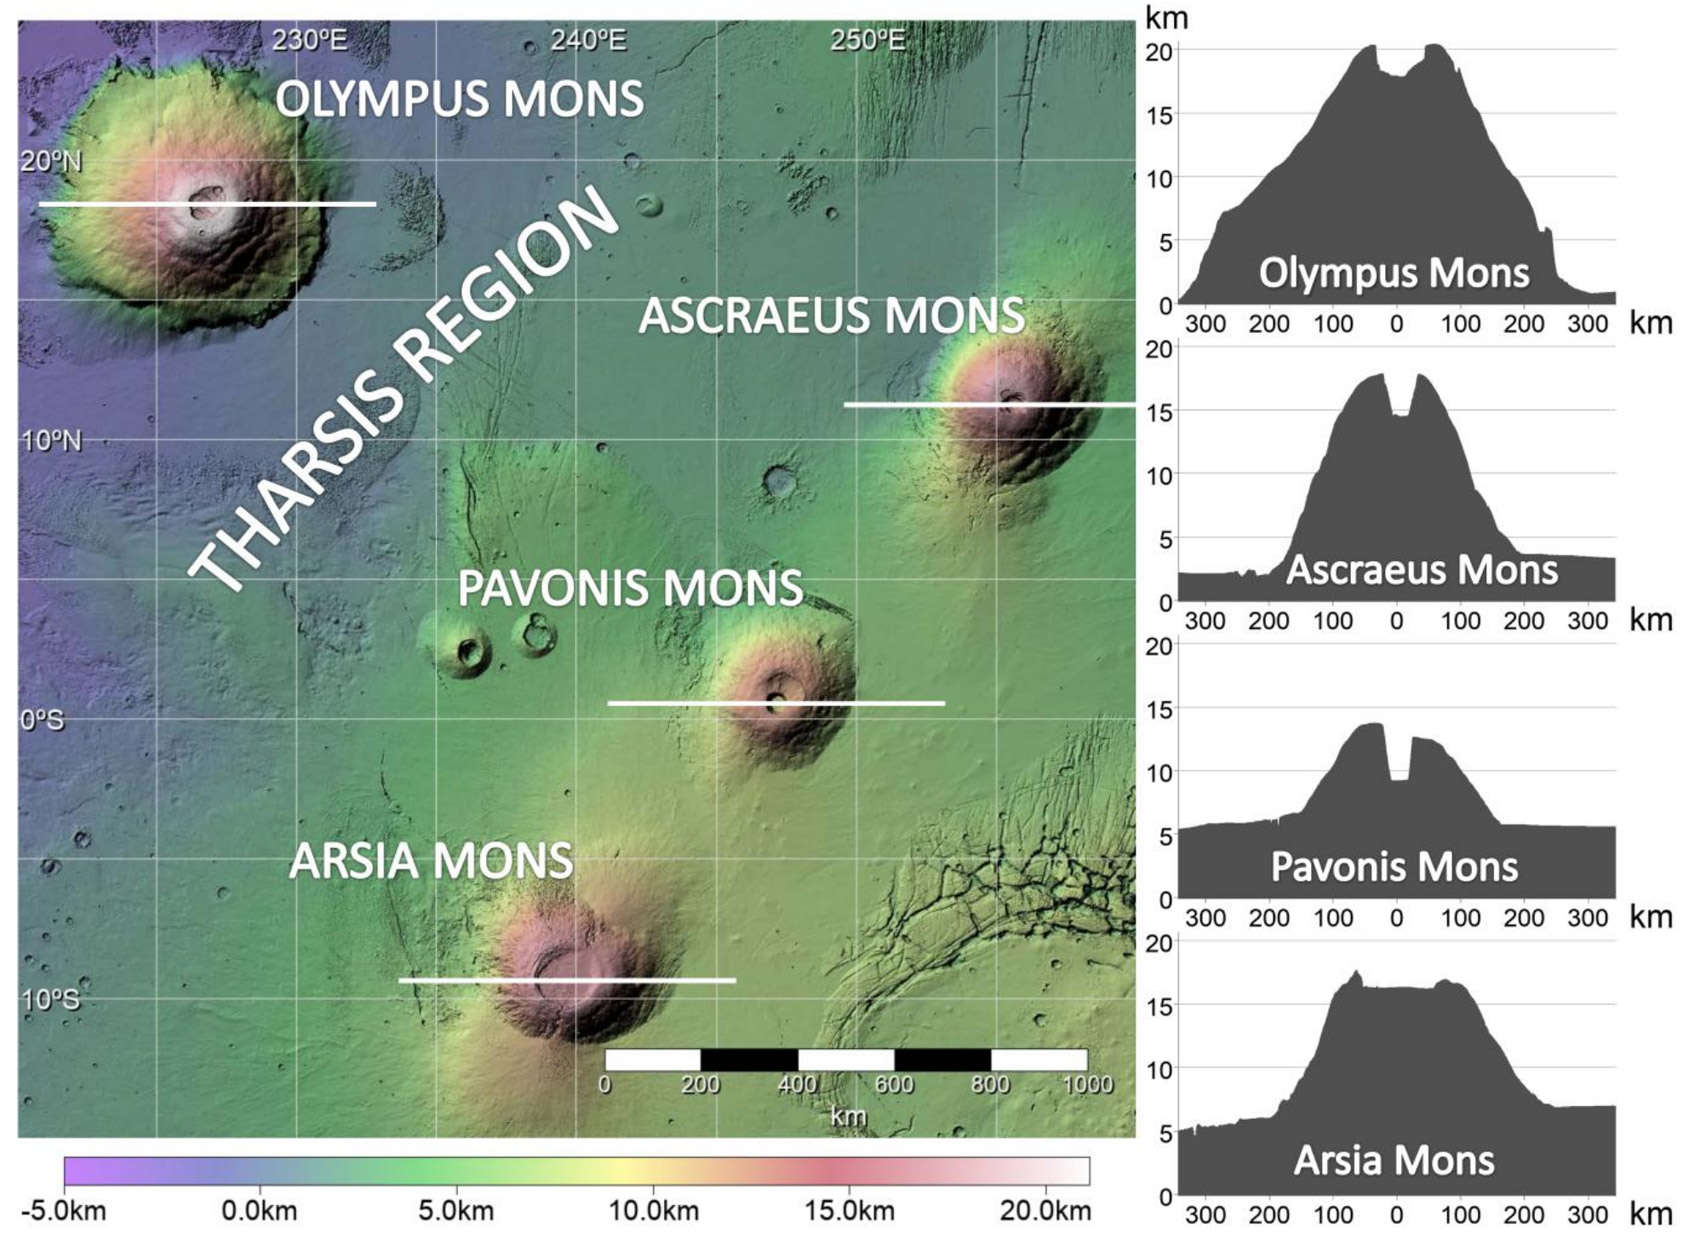 Topography of the four huge volcanoes in the Tharsis region on Mars. All are hundreds of kilometers wide and have calderas 50 – 100 km wide. Arsia Mons is the farthest south, and is about 16 km high at the caldera. Credit: Hernández-Bernal et al.